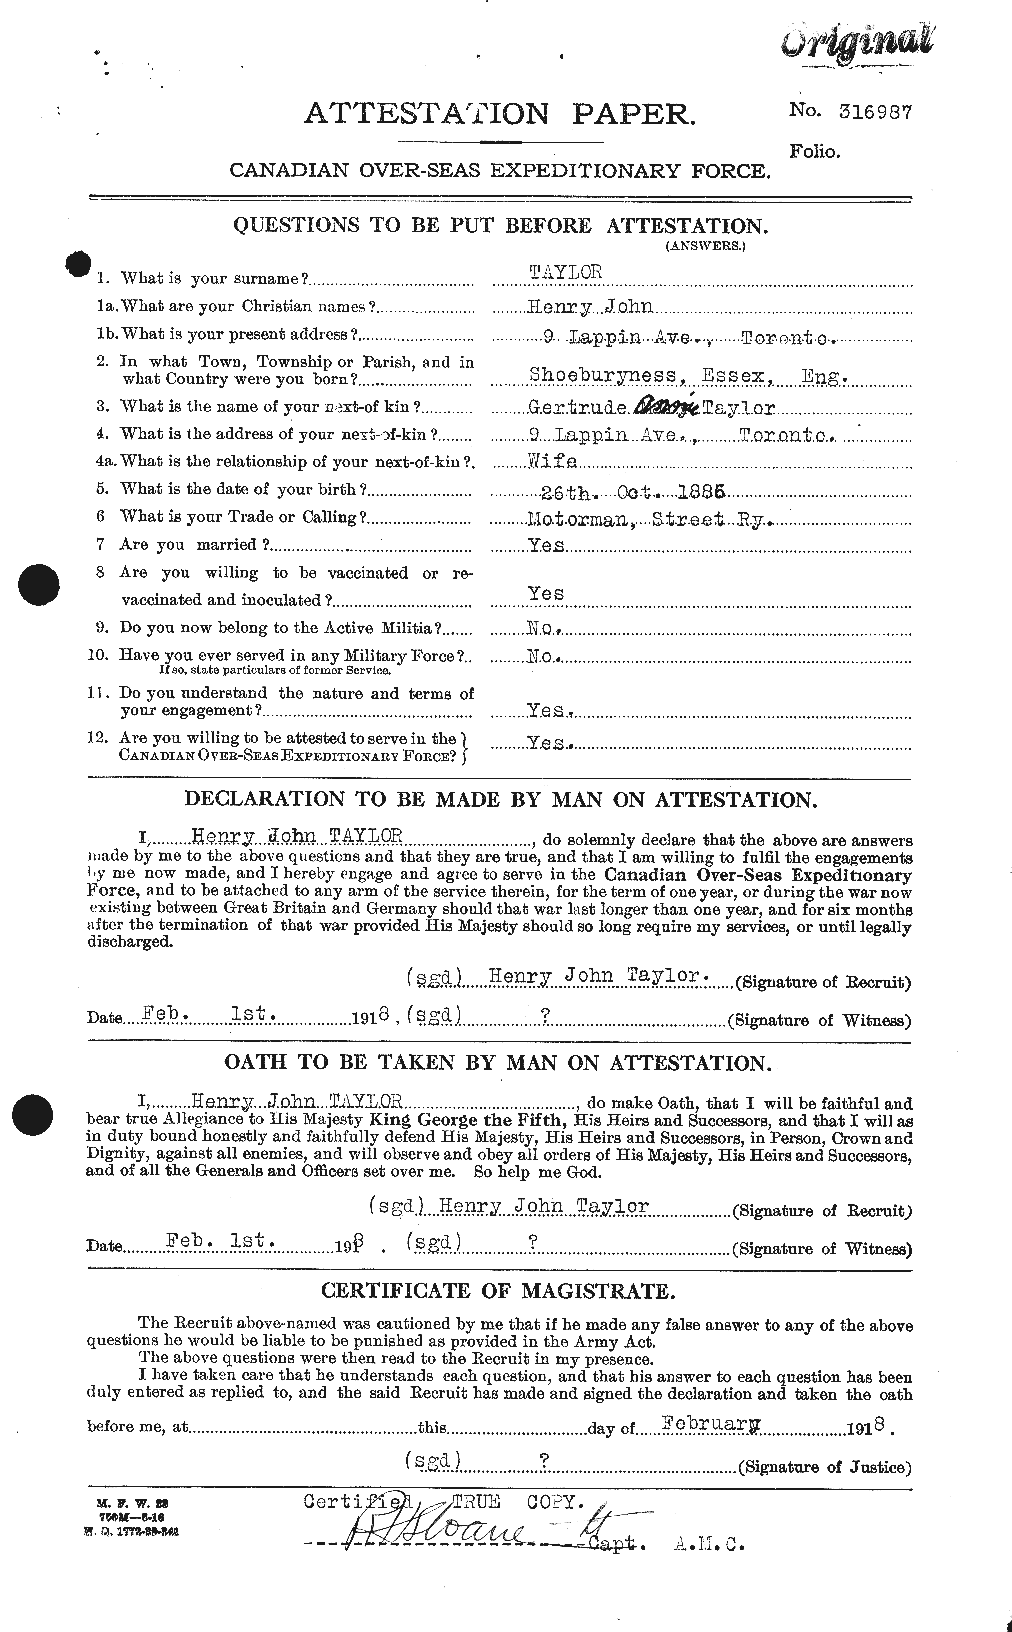 Personnel Records of the First World War - CEF 626545a